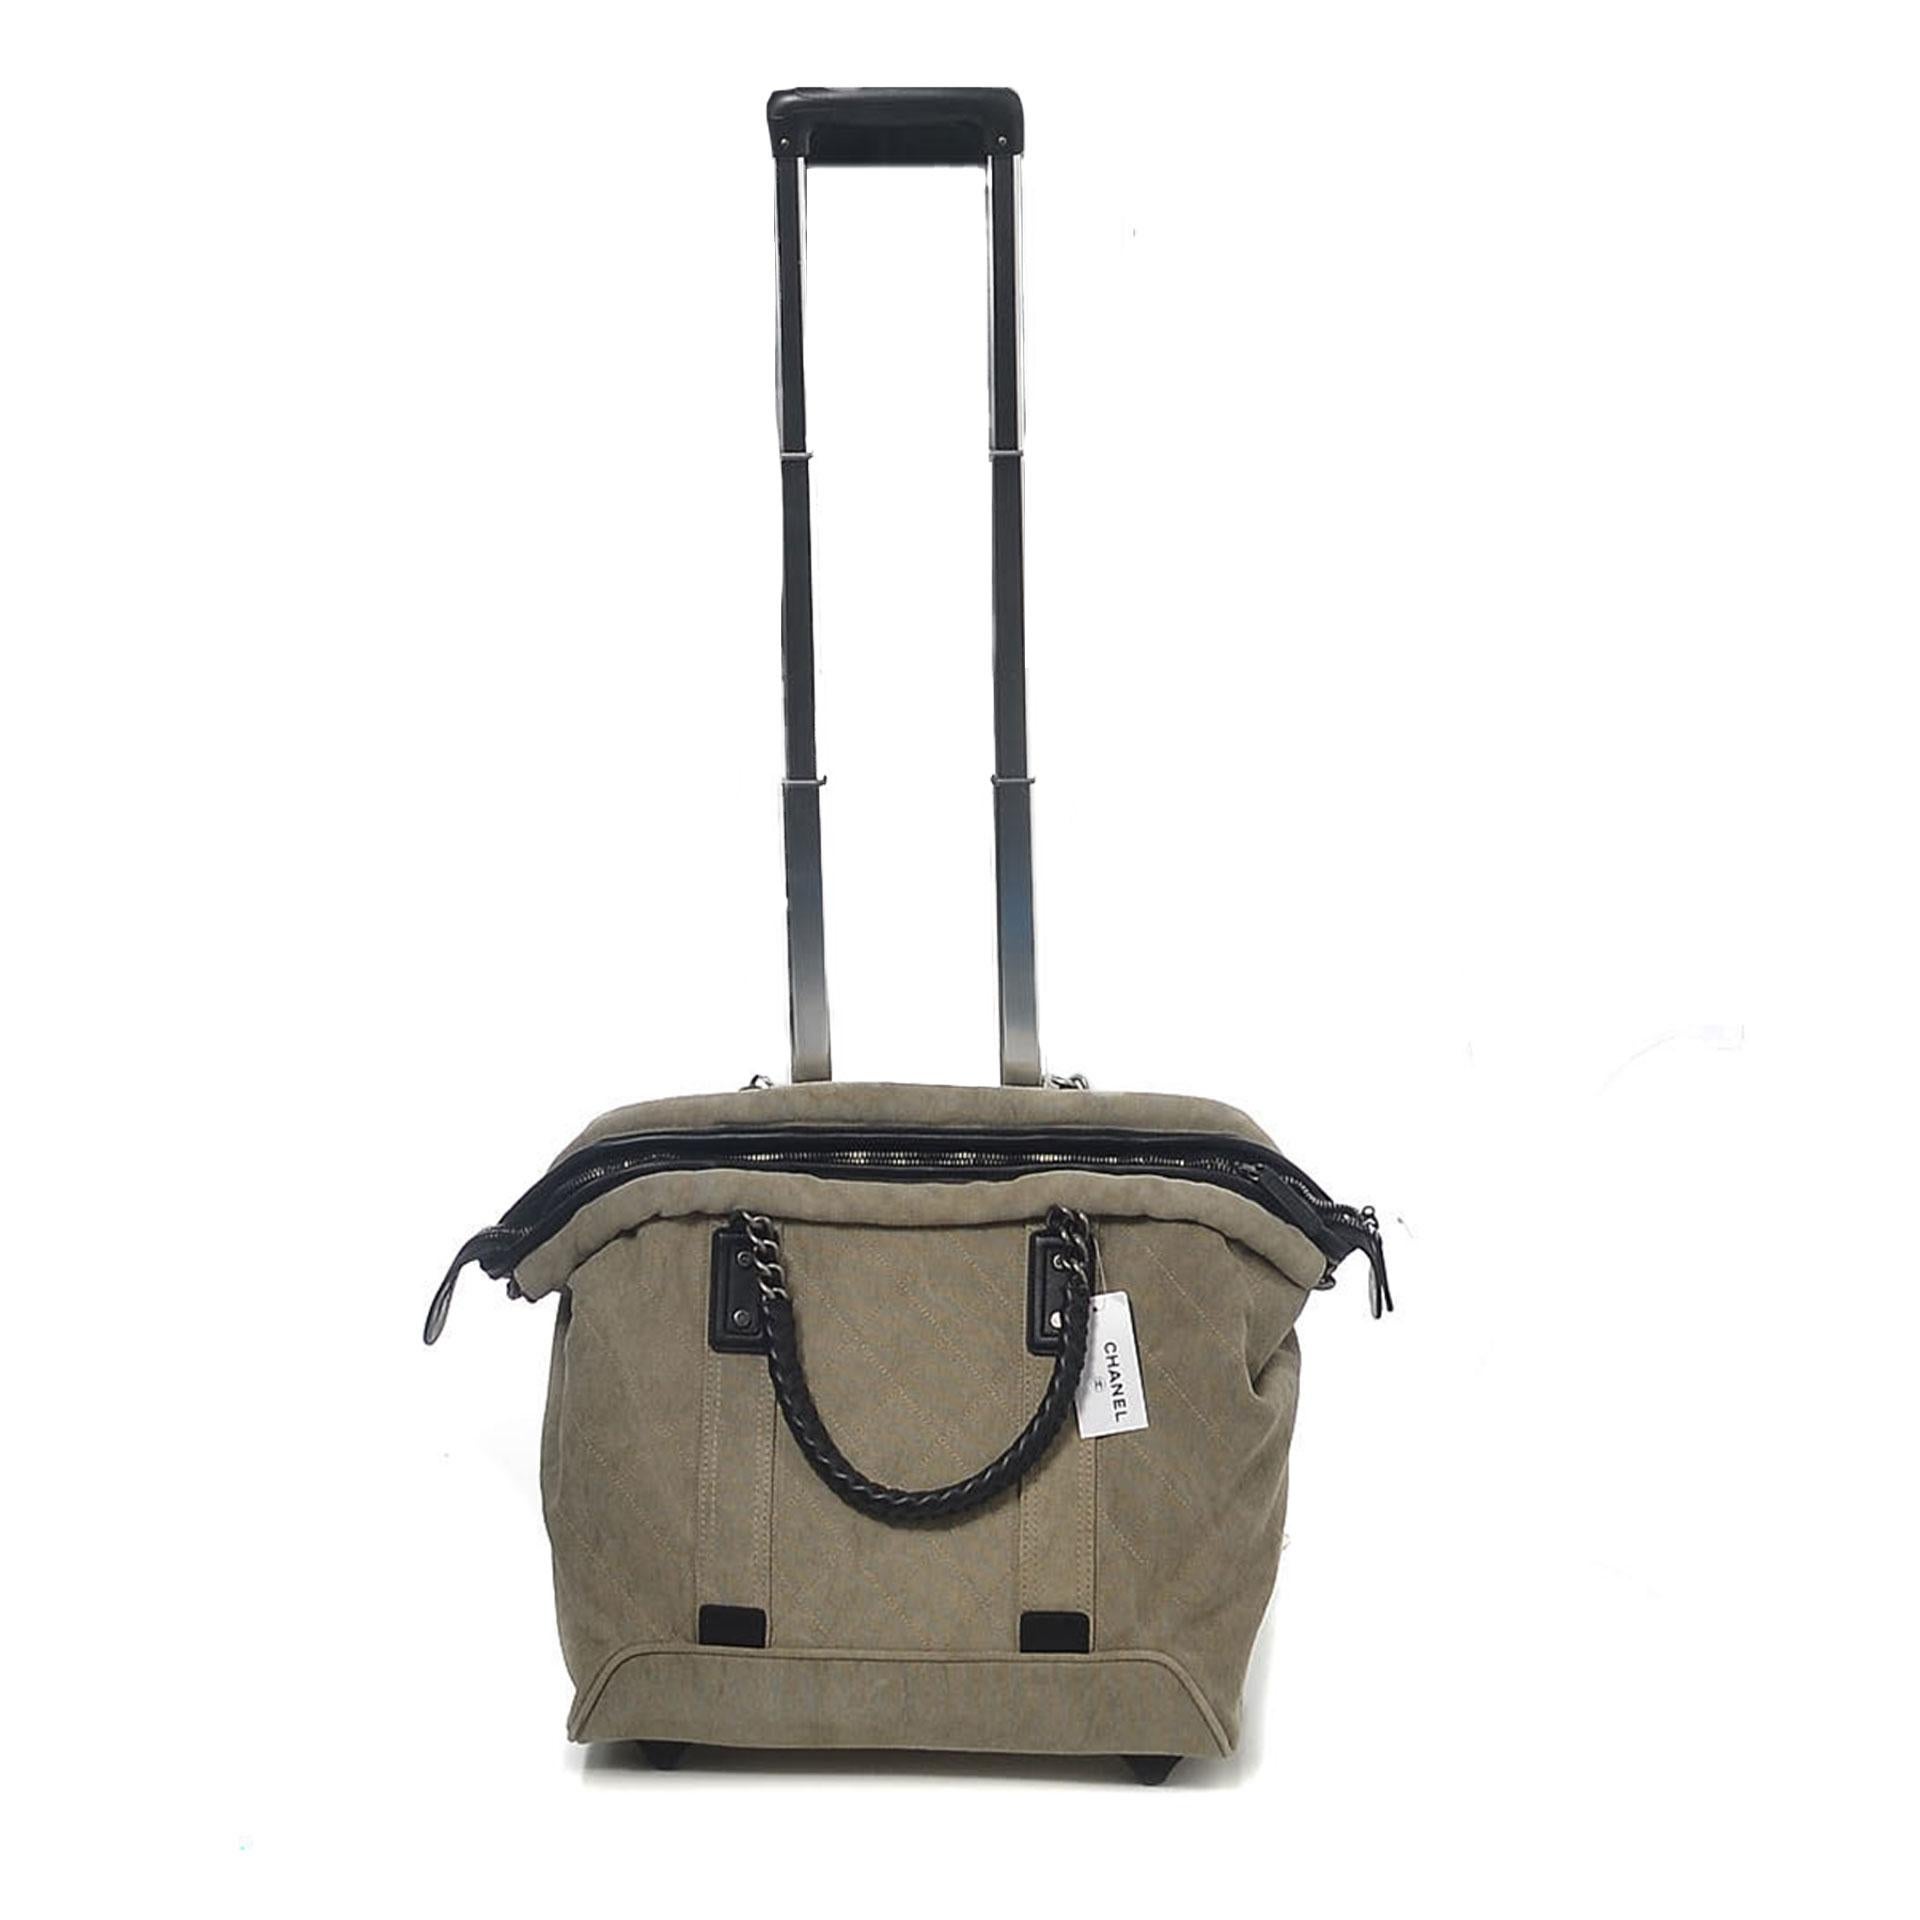 Chanel 2016 Chic Taupe Beige Travel Carry-On Trolley Set

Luggage Bag Set of Two Bags

Bag 1:  Rolling Trolley Bag
Ruthenium hardware
Grey beige canvas
Rolled top handles
Rolling wheels
Top zipper
Red burgundy nylon interior
Retractable handle 
Made